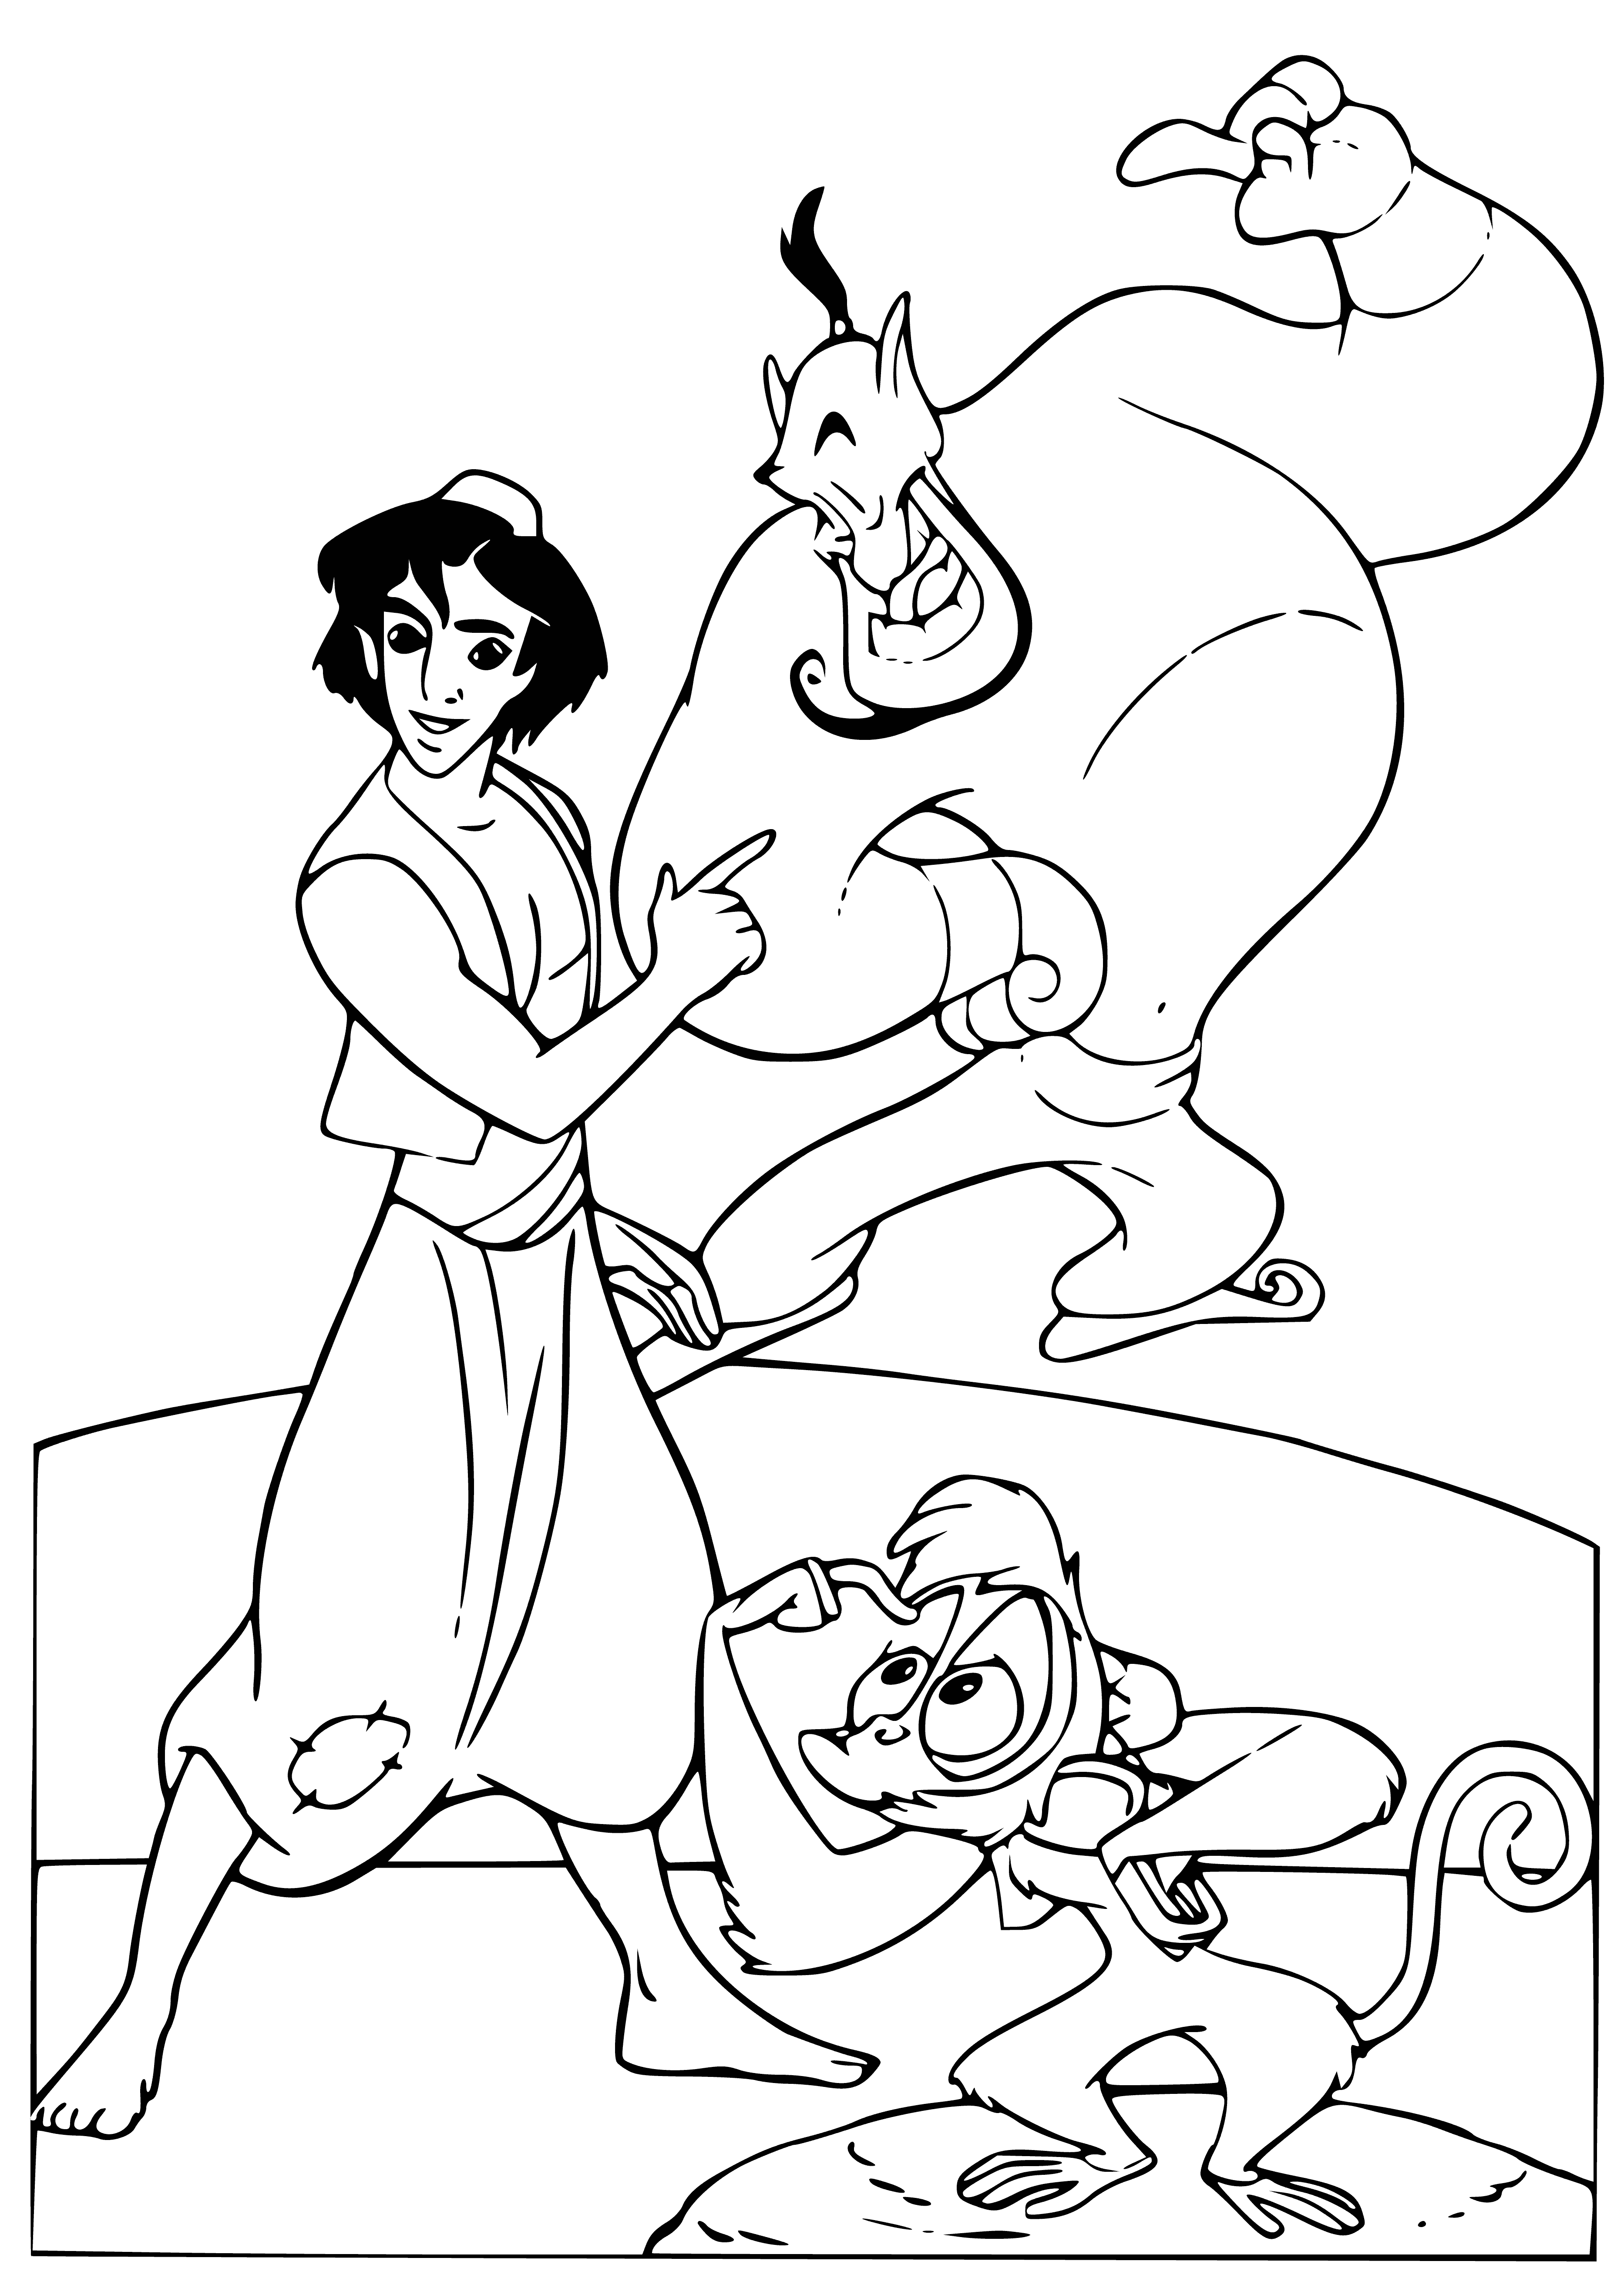 coloring page: Aladdin, Jeannie, & Abu, char. w/ brown skin & hair, join in exciting adventure; Aladdin's in a purple vest & white pants, Jeannie in pink dress, & Abu w/ purple vest & gold chain.